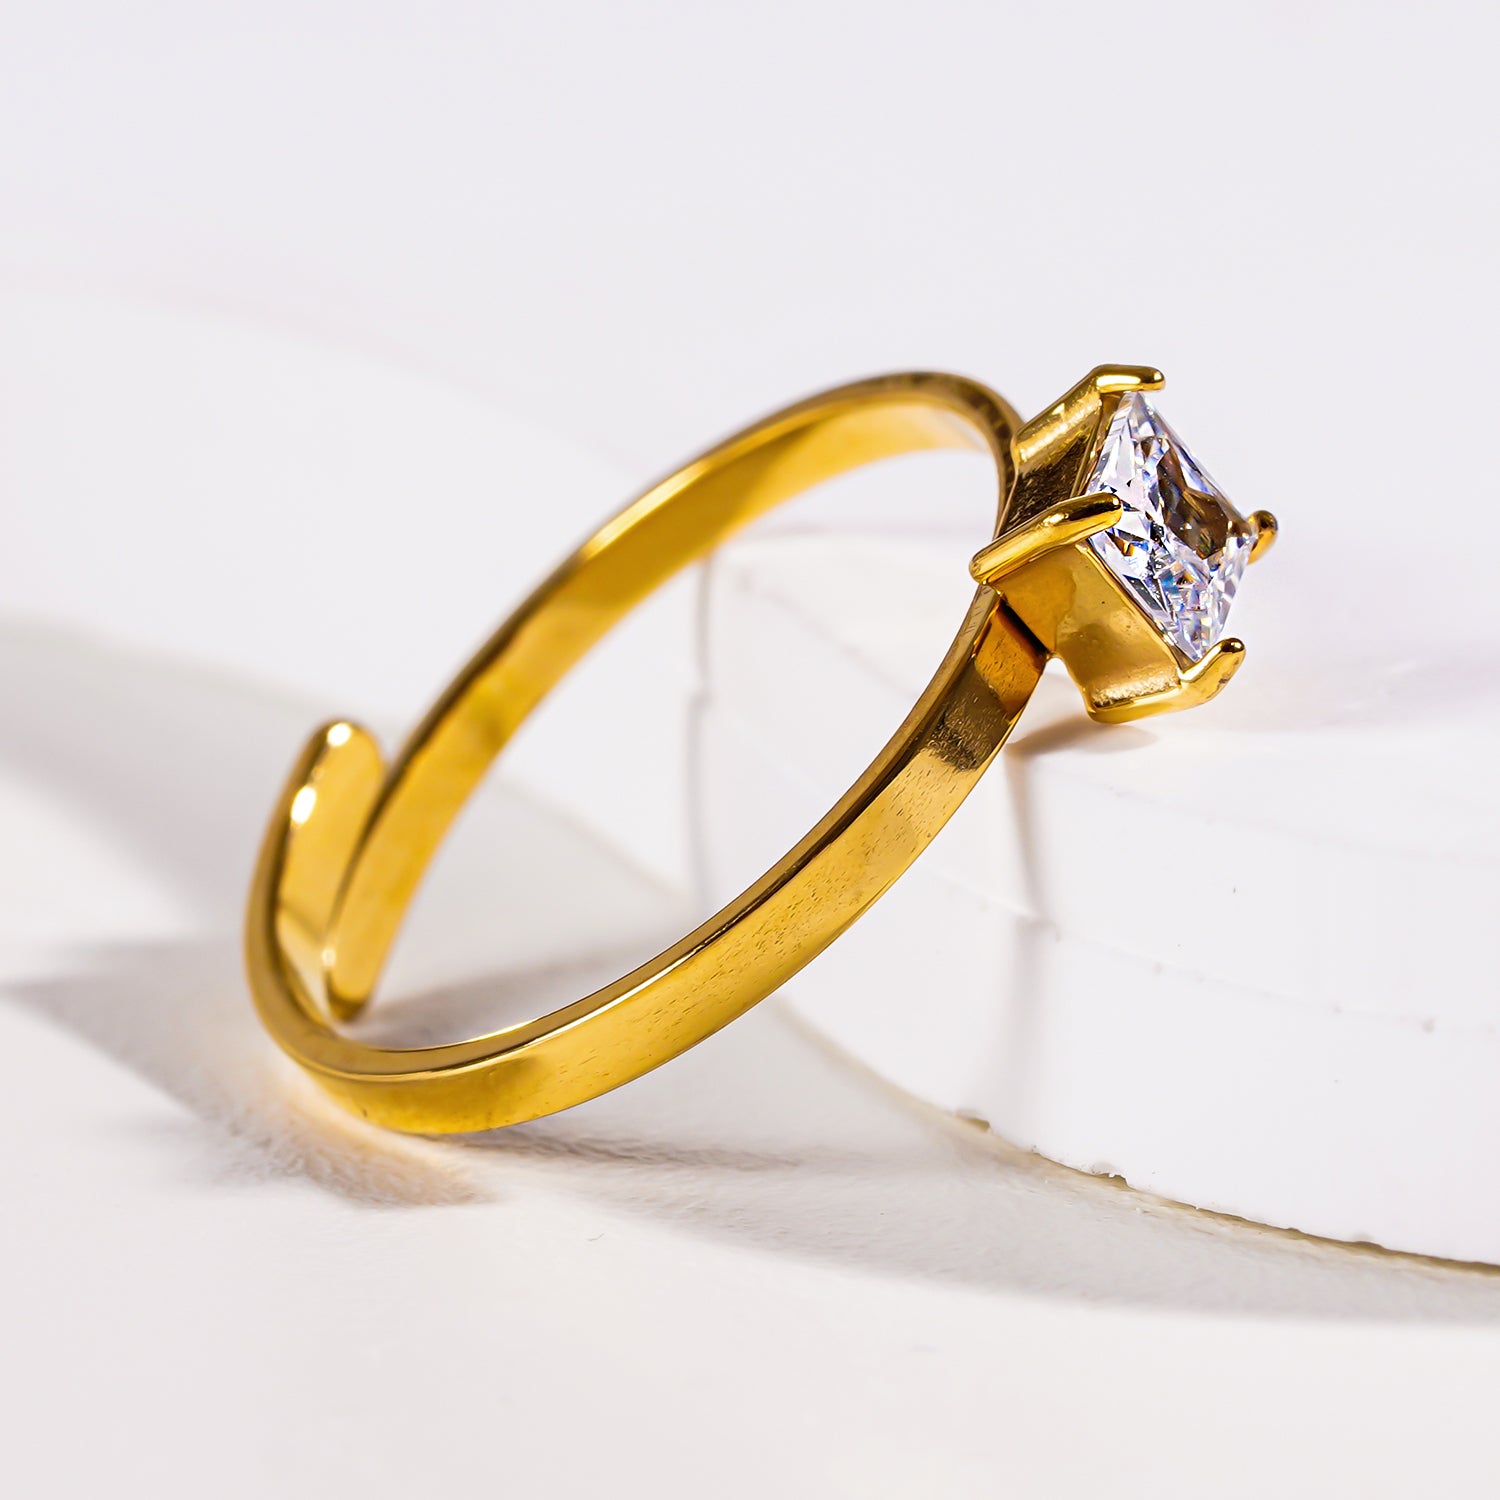 Style ADHIKA 2895: Classic Gold Ring with a Square Zirconia Centerpiece.